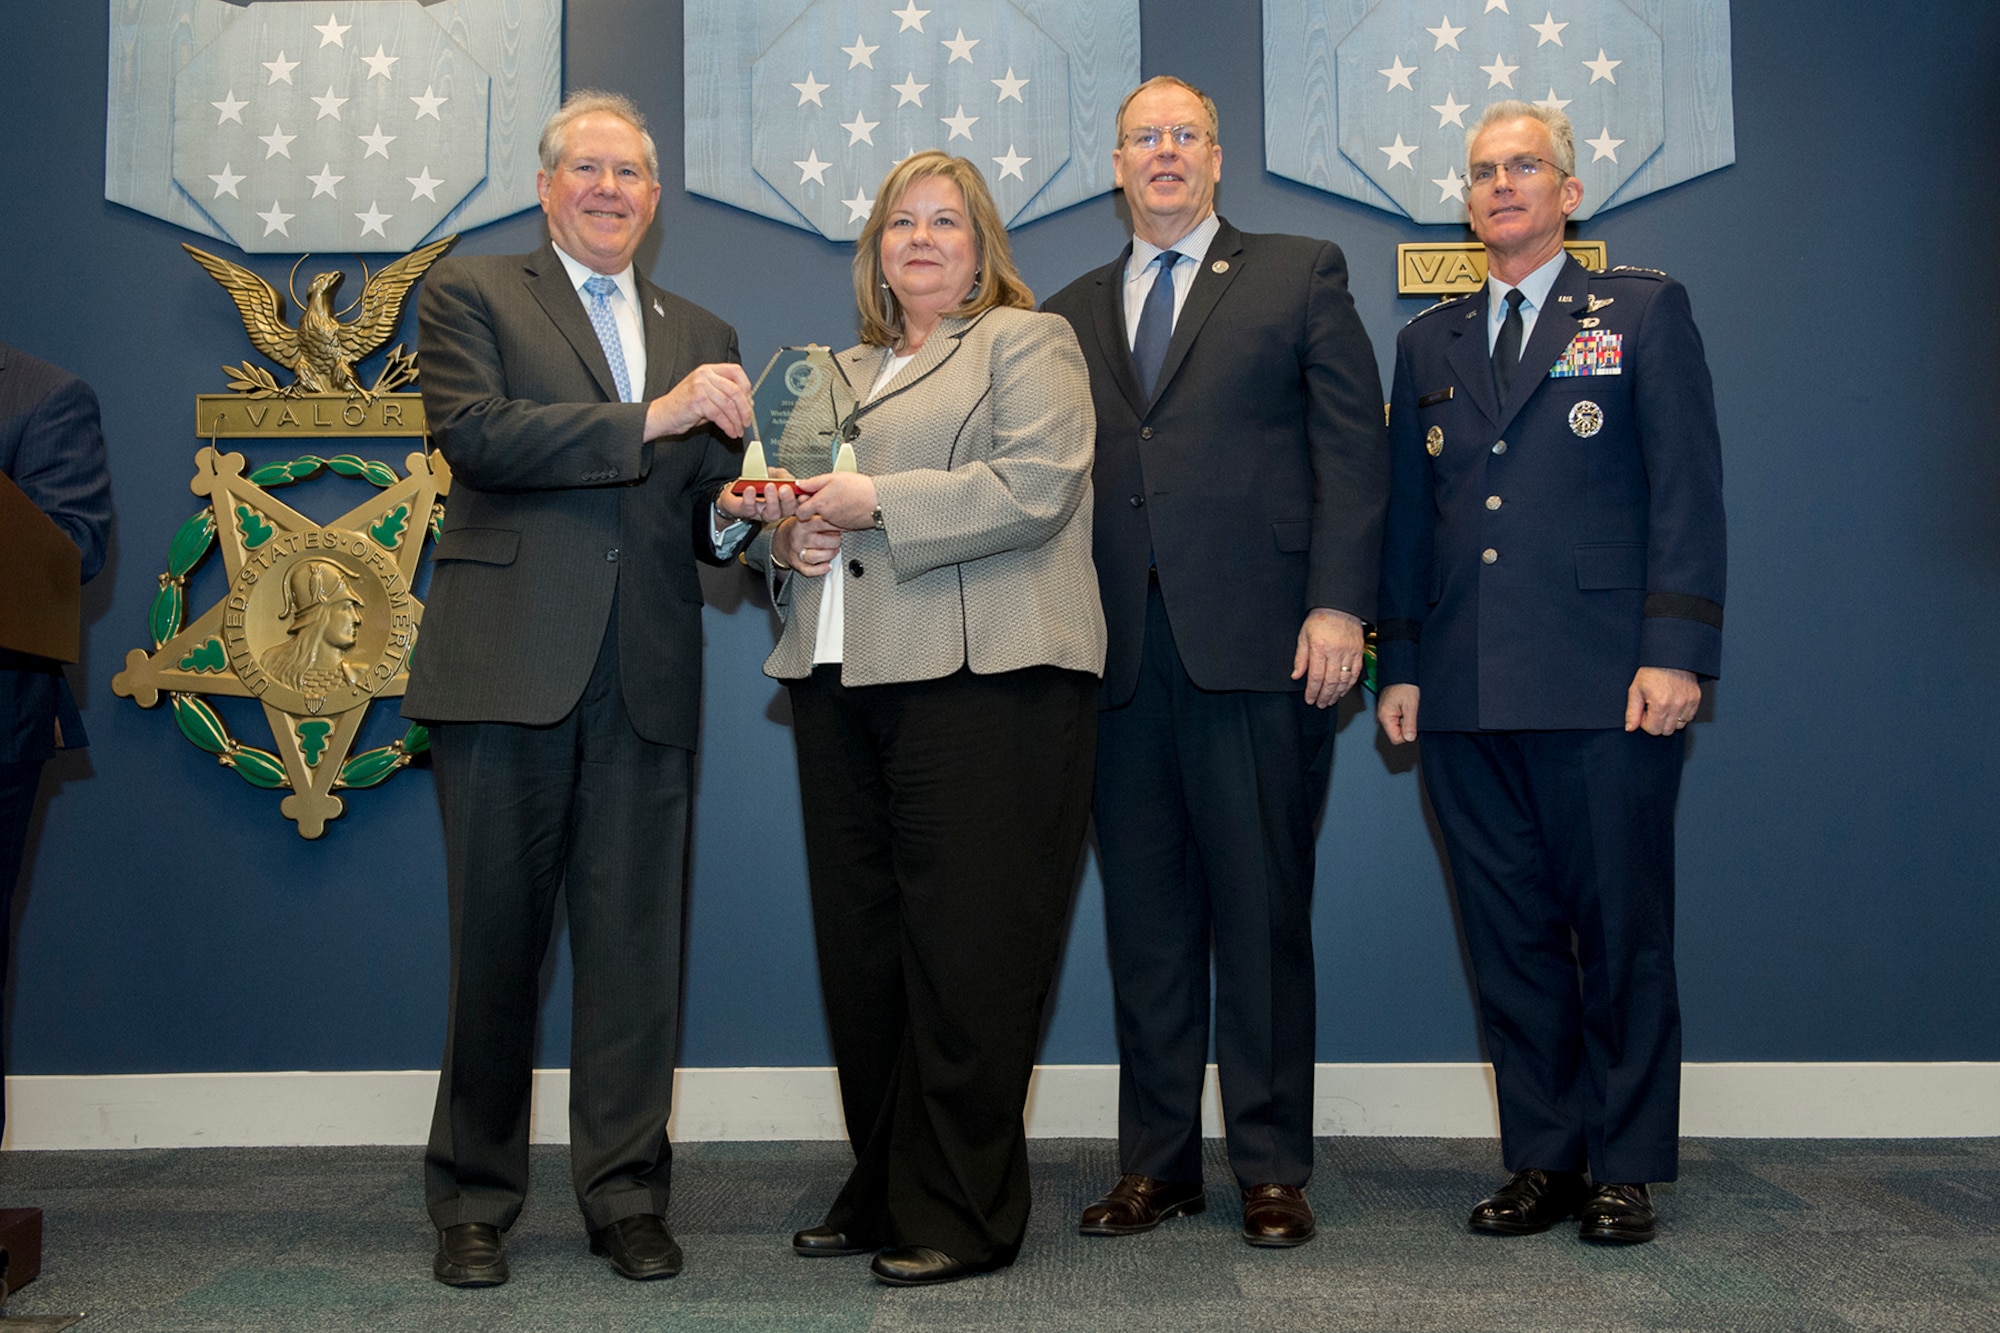 Frank Kendall, Under Secretary of Defense for Acquisition, left, presents Polly McCall with a Defense Acquisition Workforce Individual Award for contracting and procurement during a ceremony at the Pentagon on Dec. 8, 2016. Standing with them are Vice Chairman of the Joint Chiefs of Staff Gen. Paul J. Selva right, and Deputy Secretary of Defense Bob Work. (DoD photo)